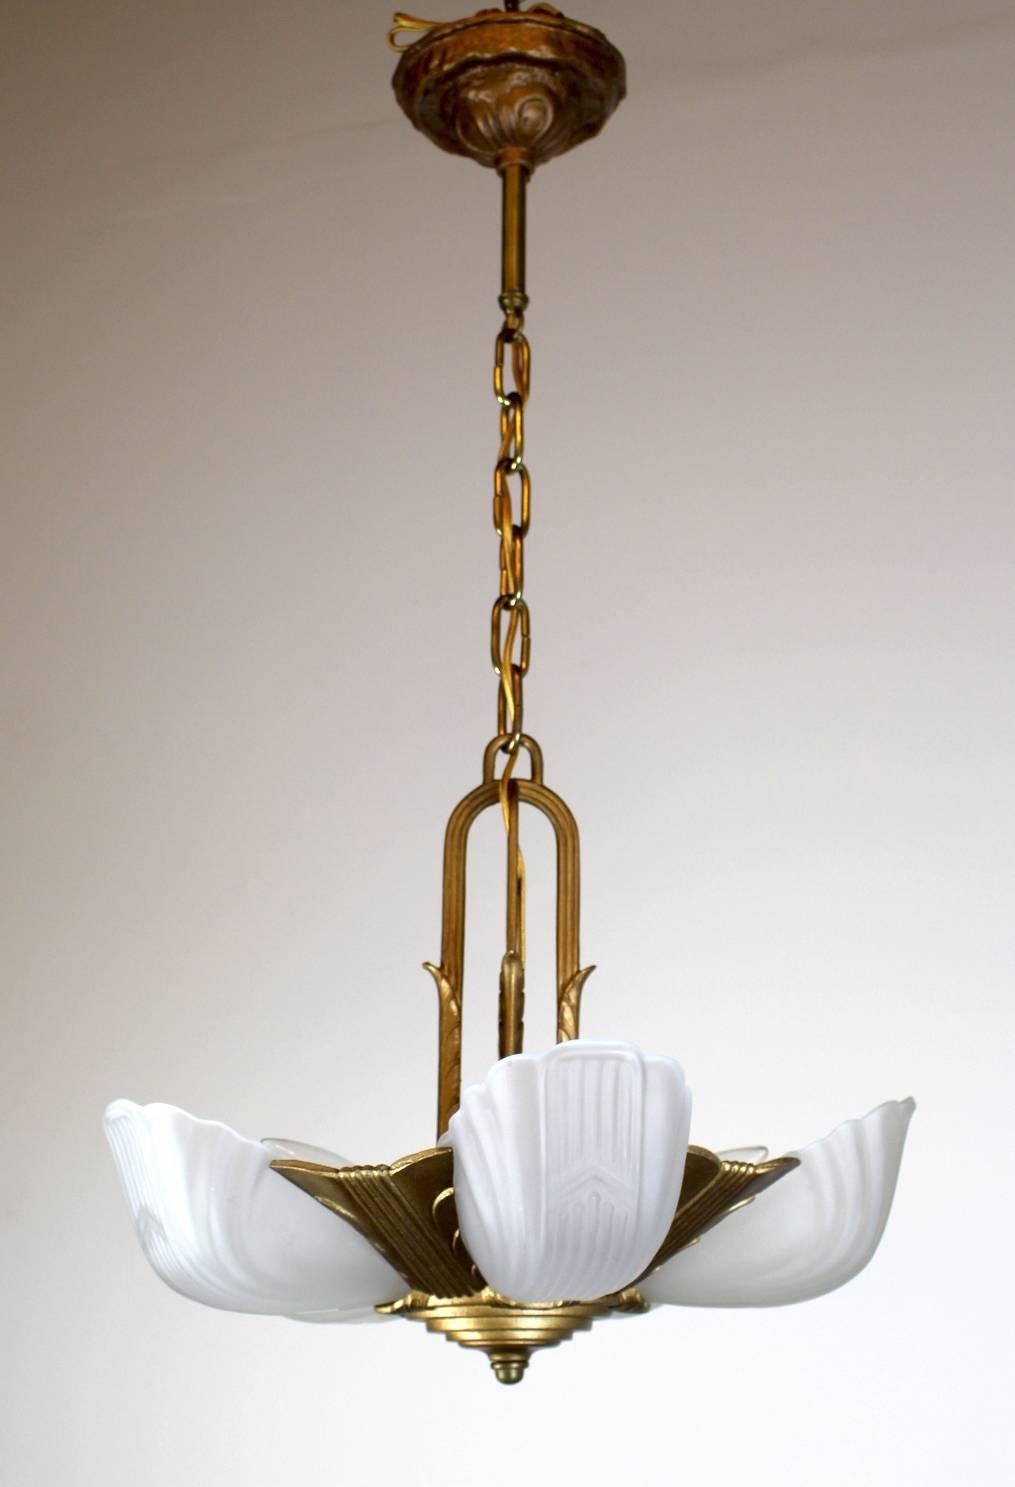 Five-Light Art Deco Drop Fixture In Excellent Condition For Sale In Vancouver, BC